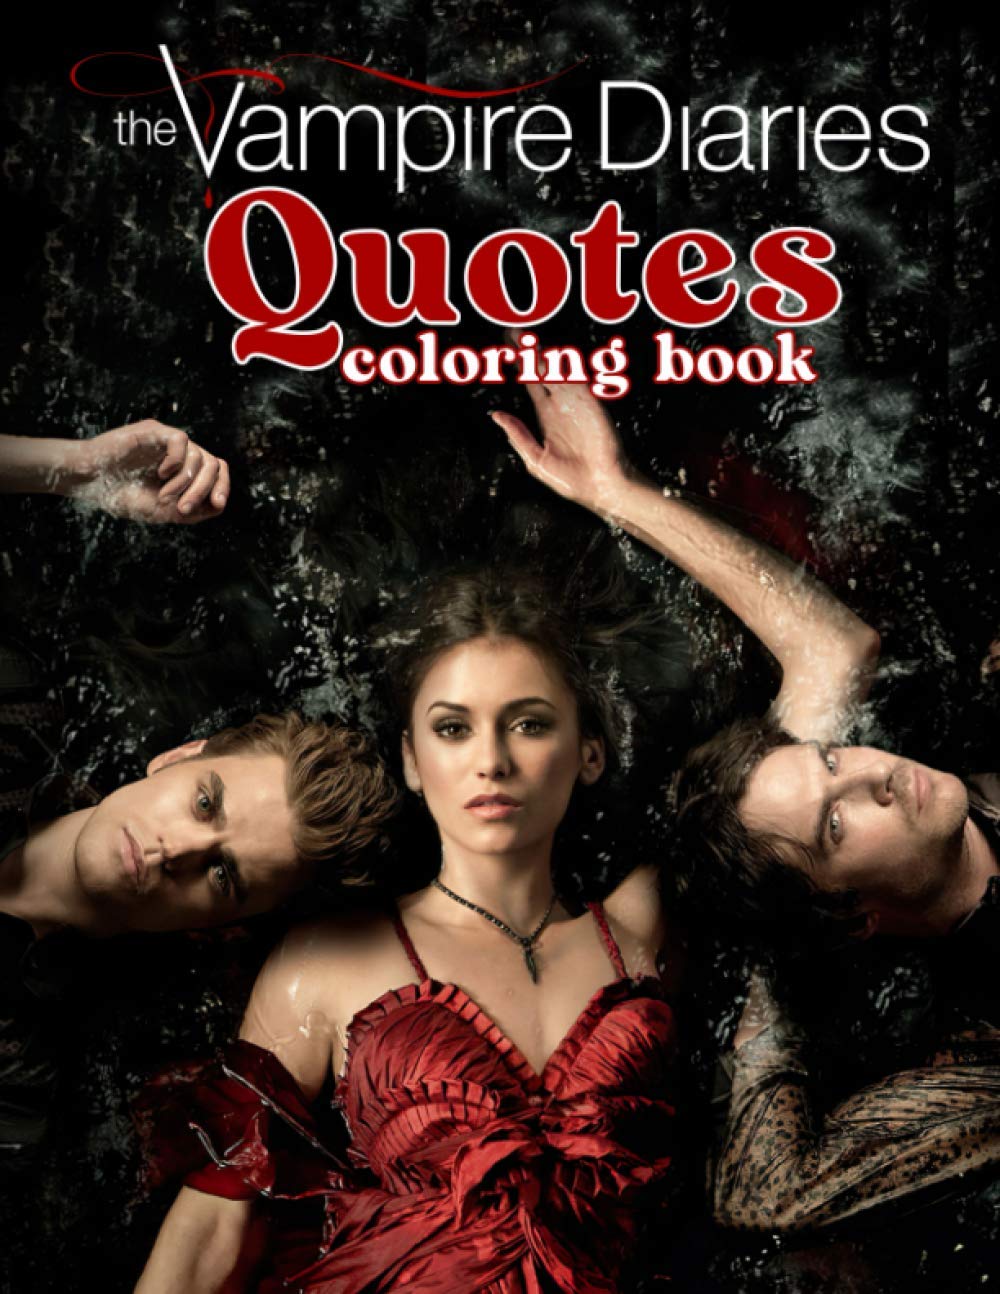 The vampire diaries quotes coloring book create to develop your memory training yourself to think quickly with special book great gift for fun in spare time by theodore perrier